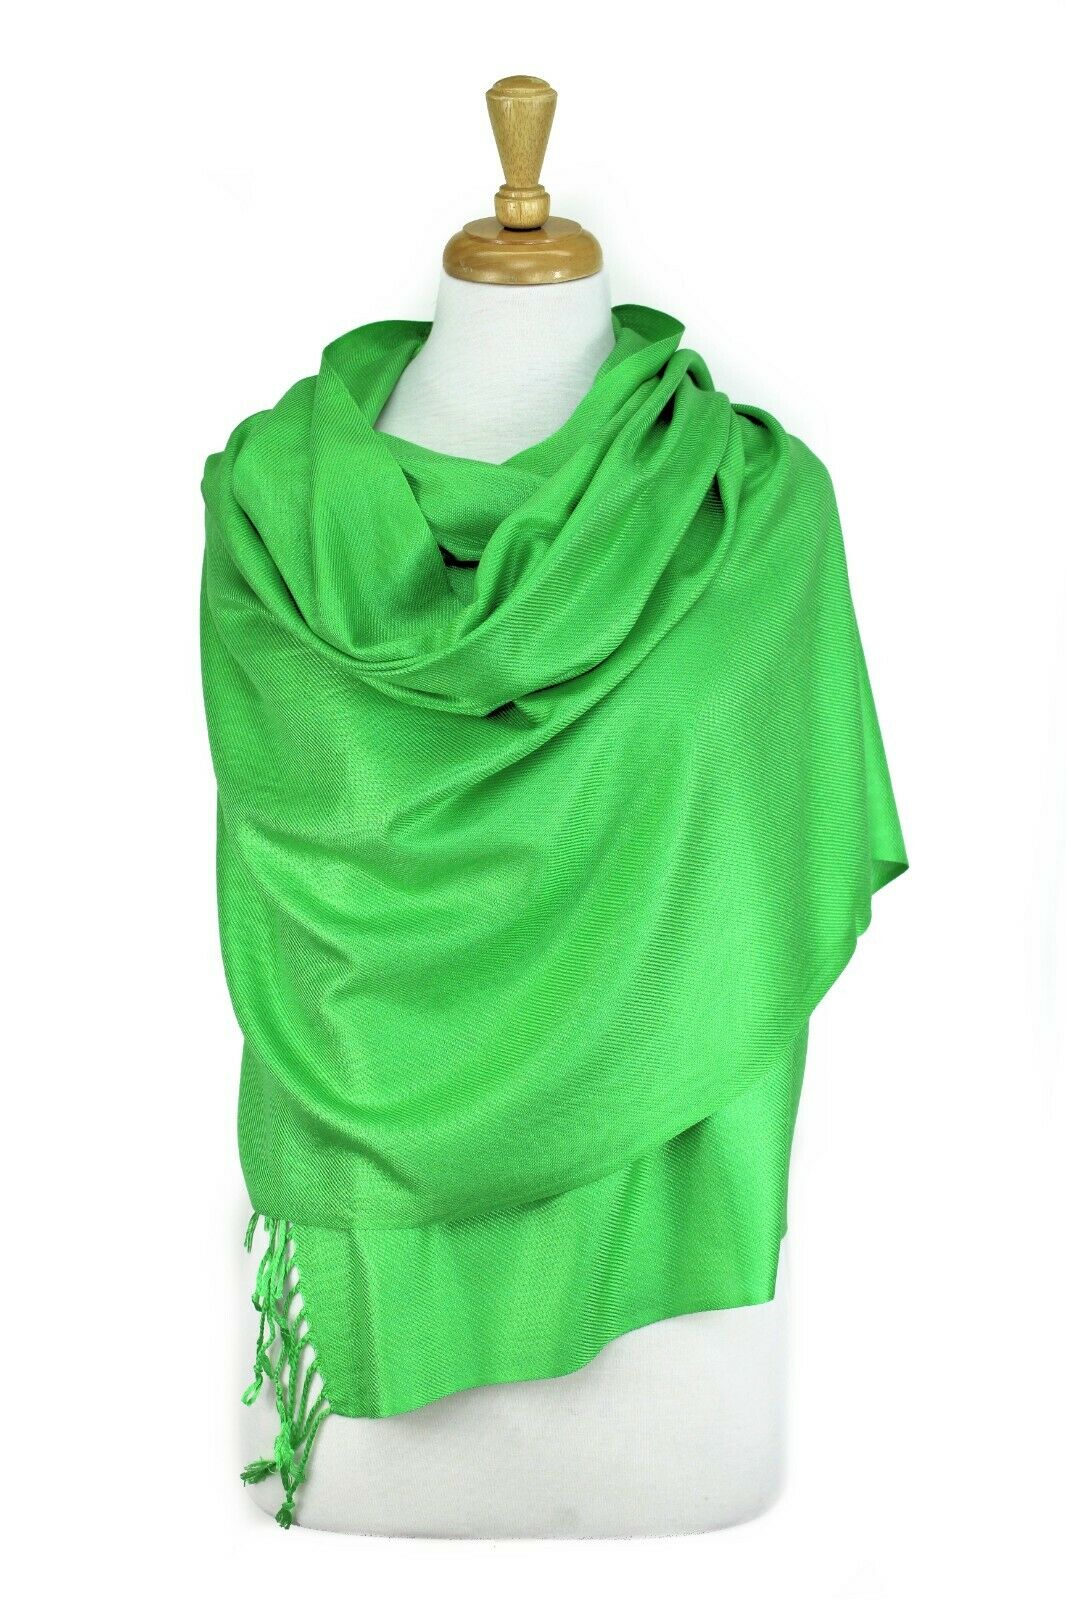 Large solid color scarf